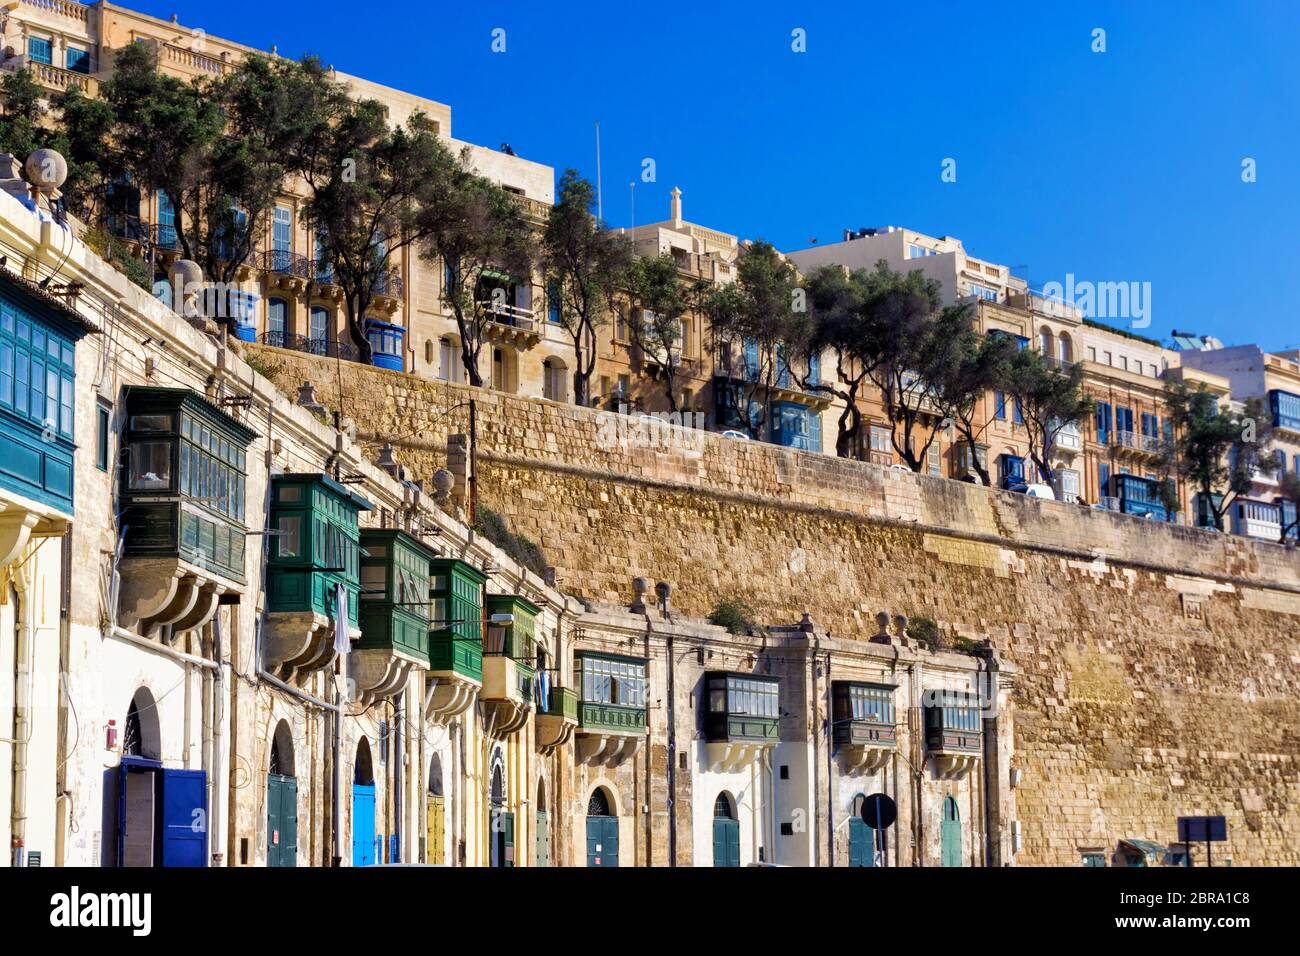 View of the old traditional buildings in Valletta, Malta Stock Photo